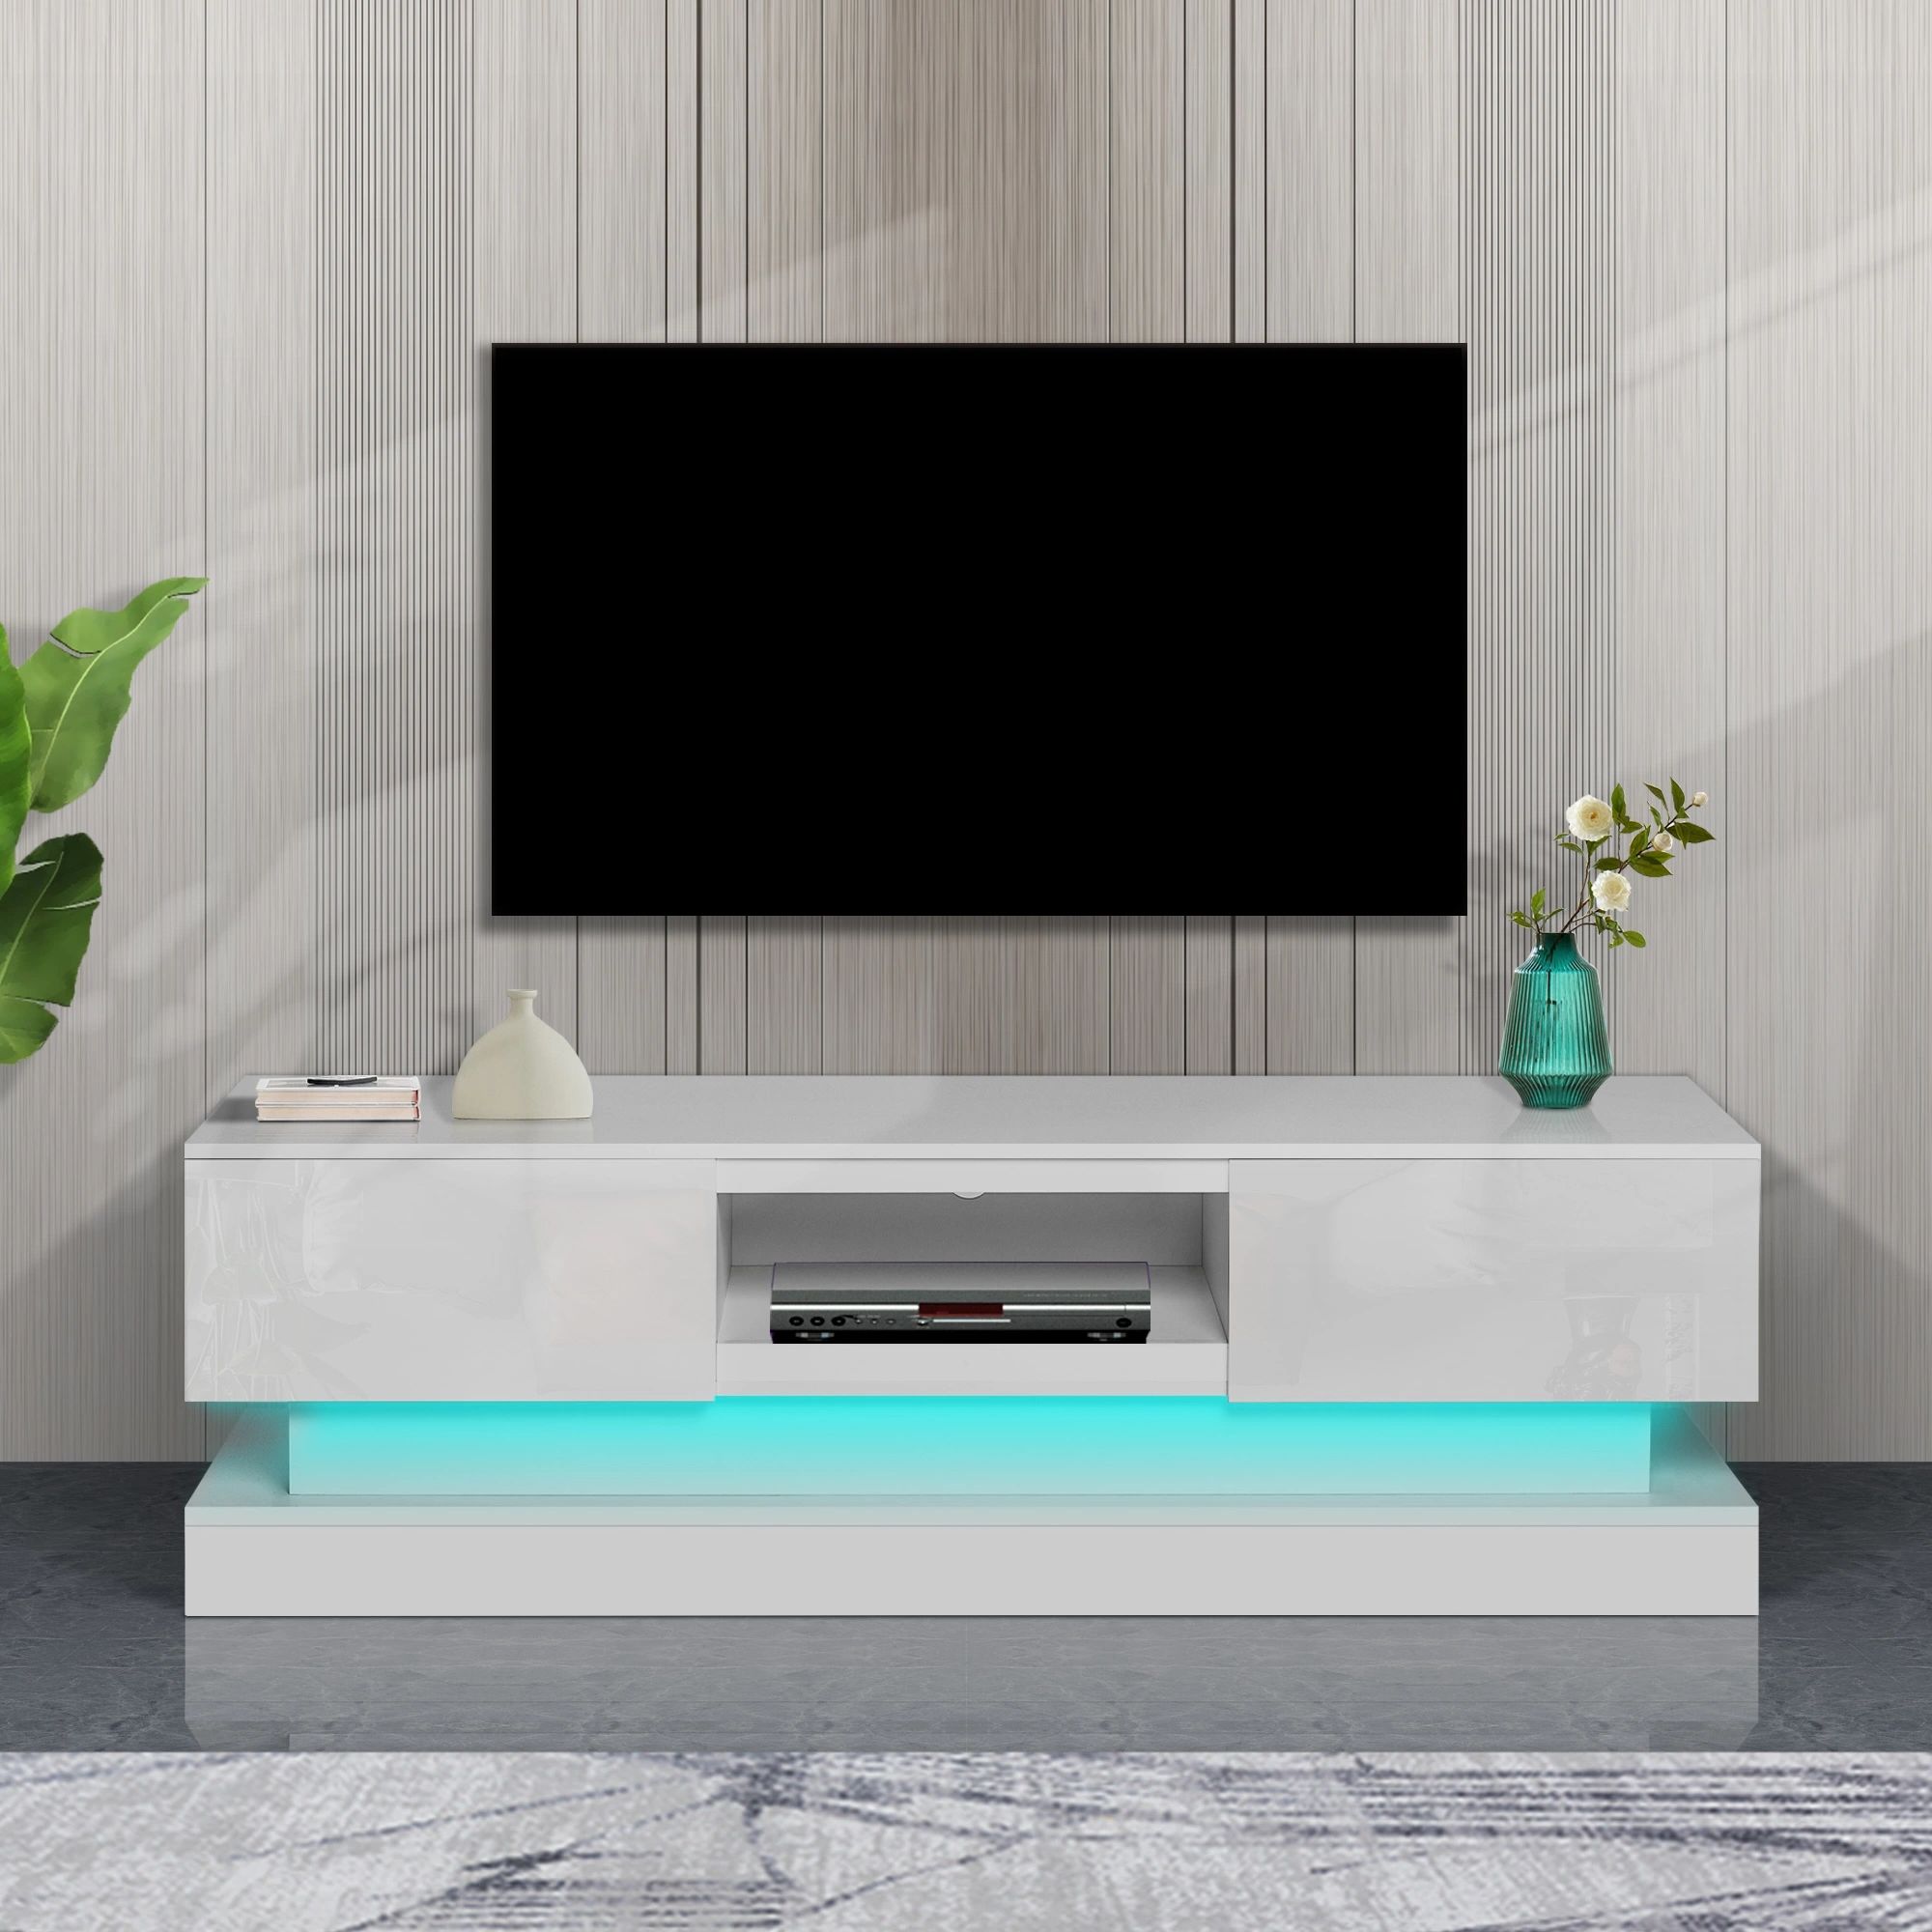 Dropship 51.18inch White Morden Tv Stand With Led Lights,high Glossy Front Tv  Cabinet,can Be Assembled In Lounge Room, Living Room Or Bedroom,color:white  To Sell Online At A Lower Price | Doba In Tv Stands With Lights (Gallery 20 of 20)